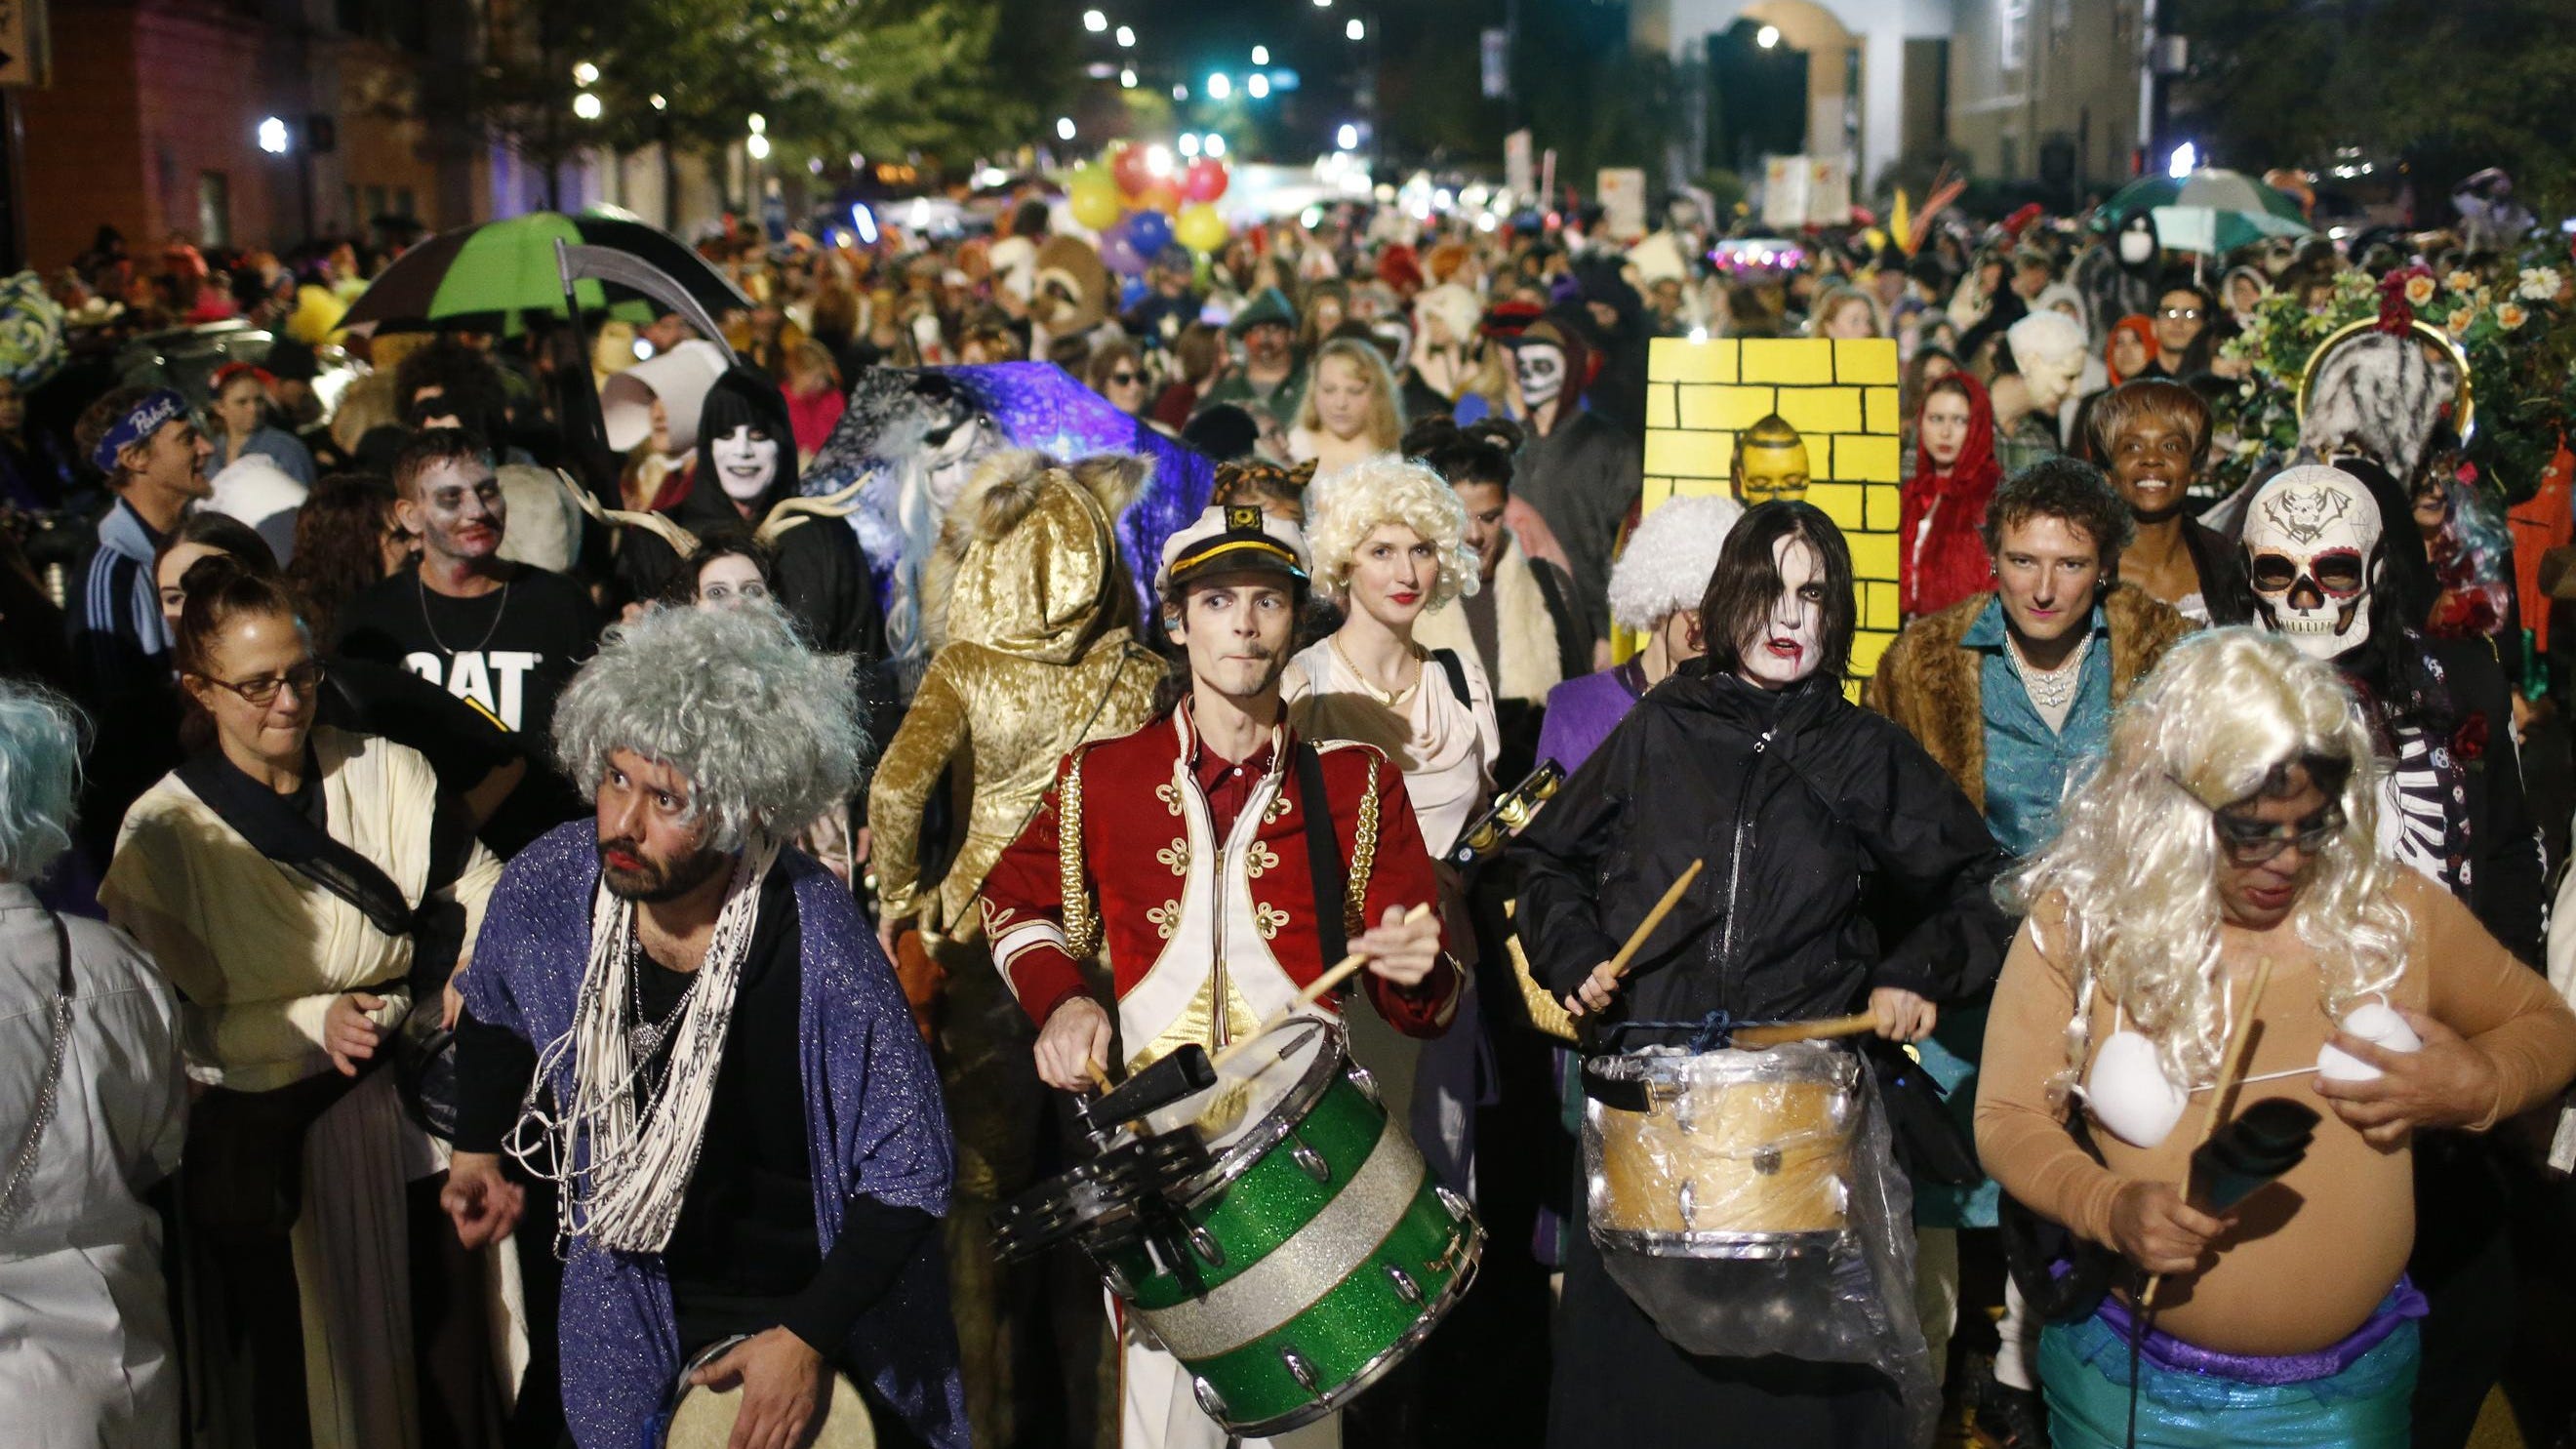 Wild Rumpus, Athens' spirited Halloween bash, continues this year, but